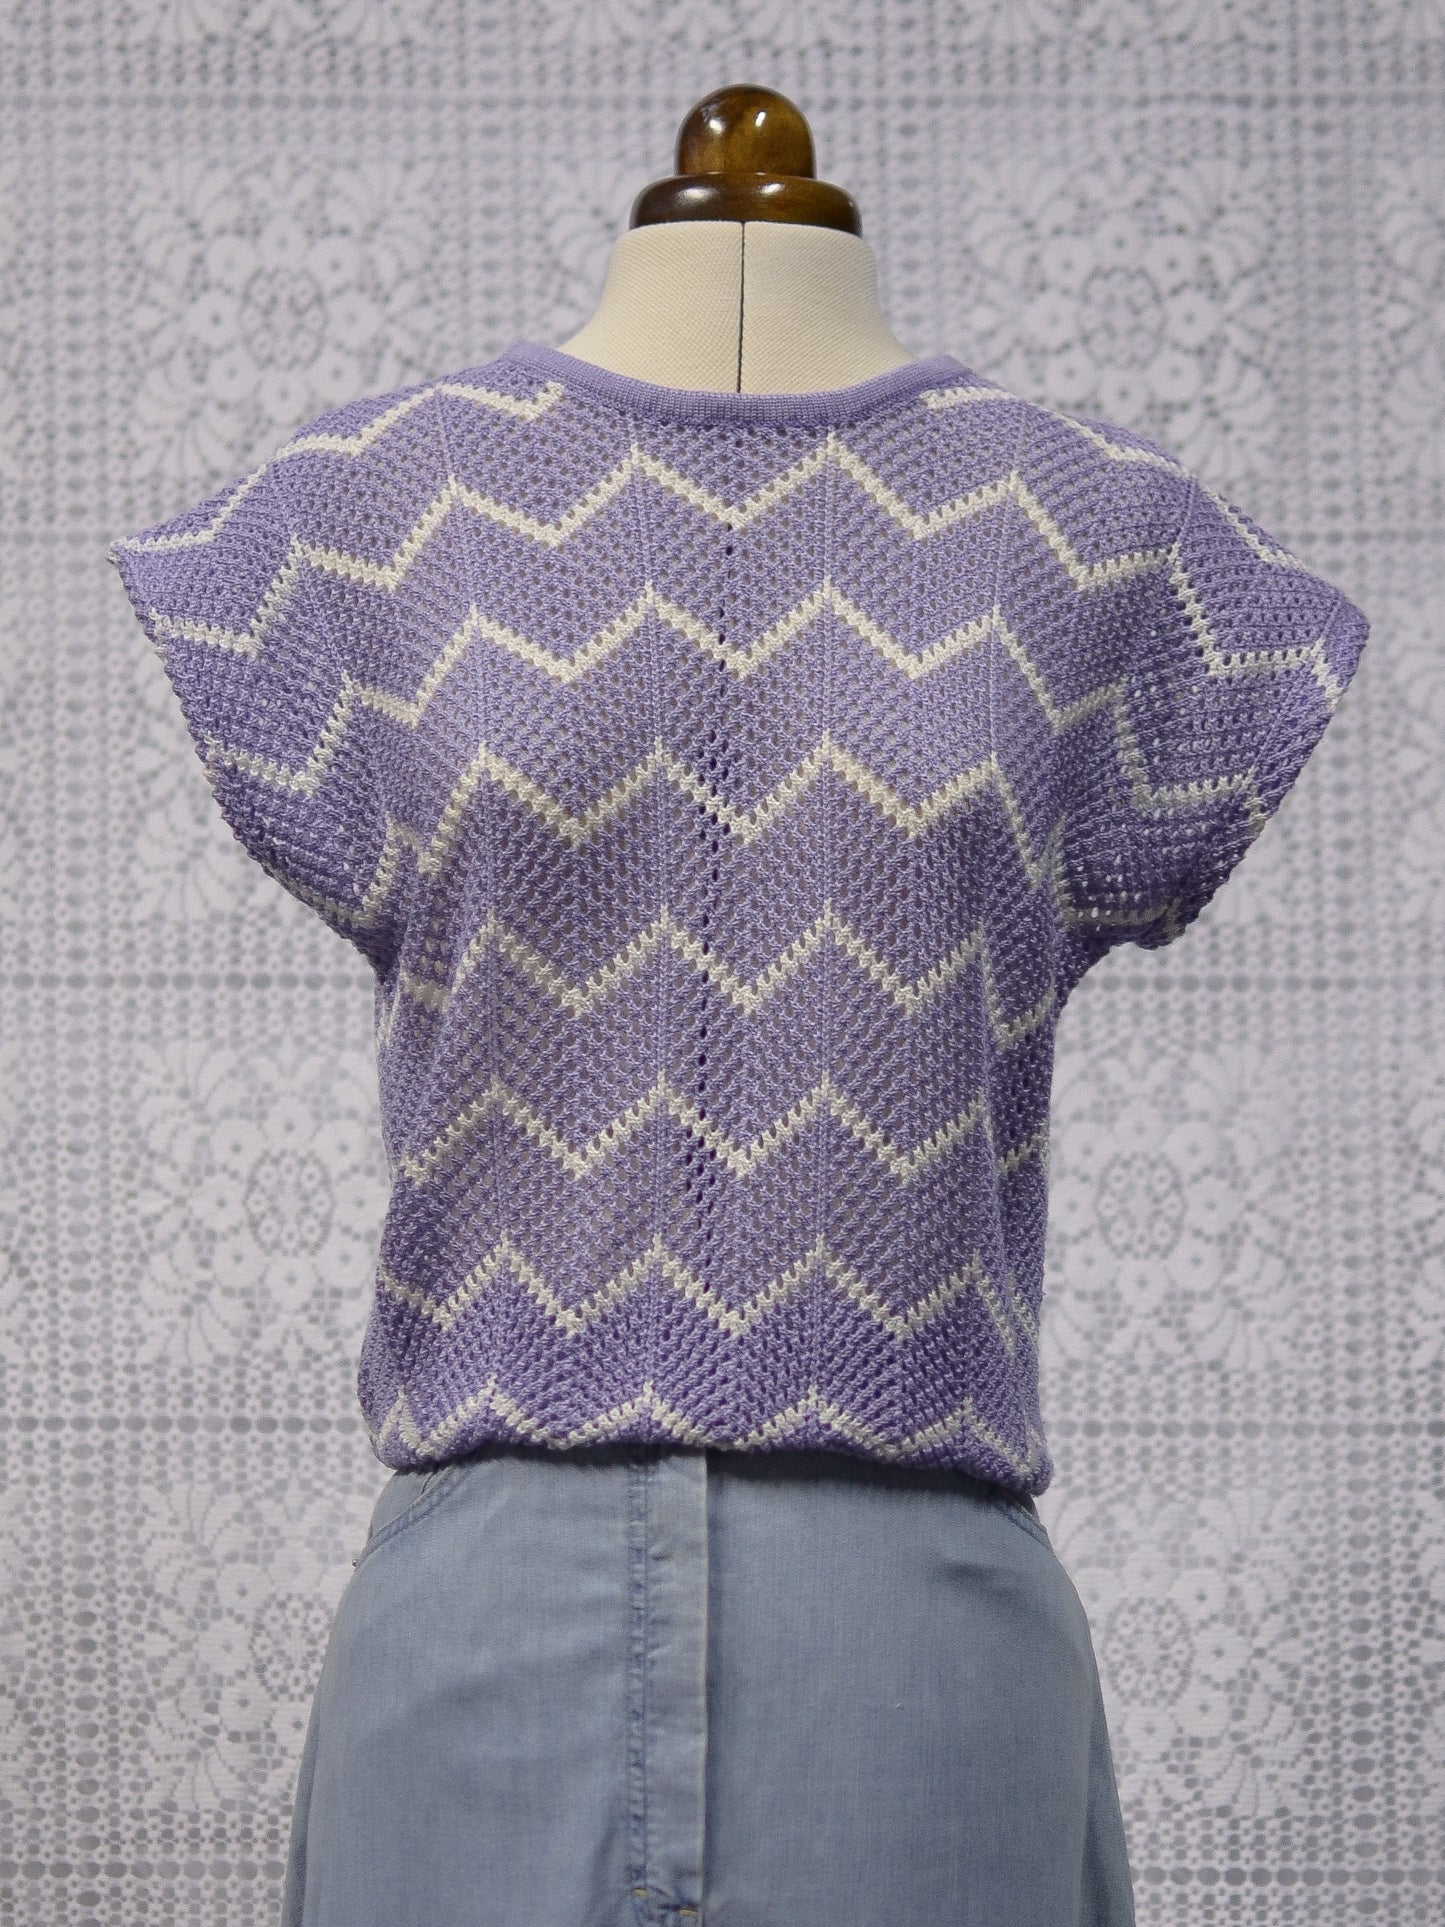 1980s lilac purple and white zigzag sleeveless crochet jumper sweater vest